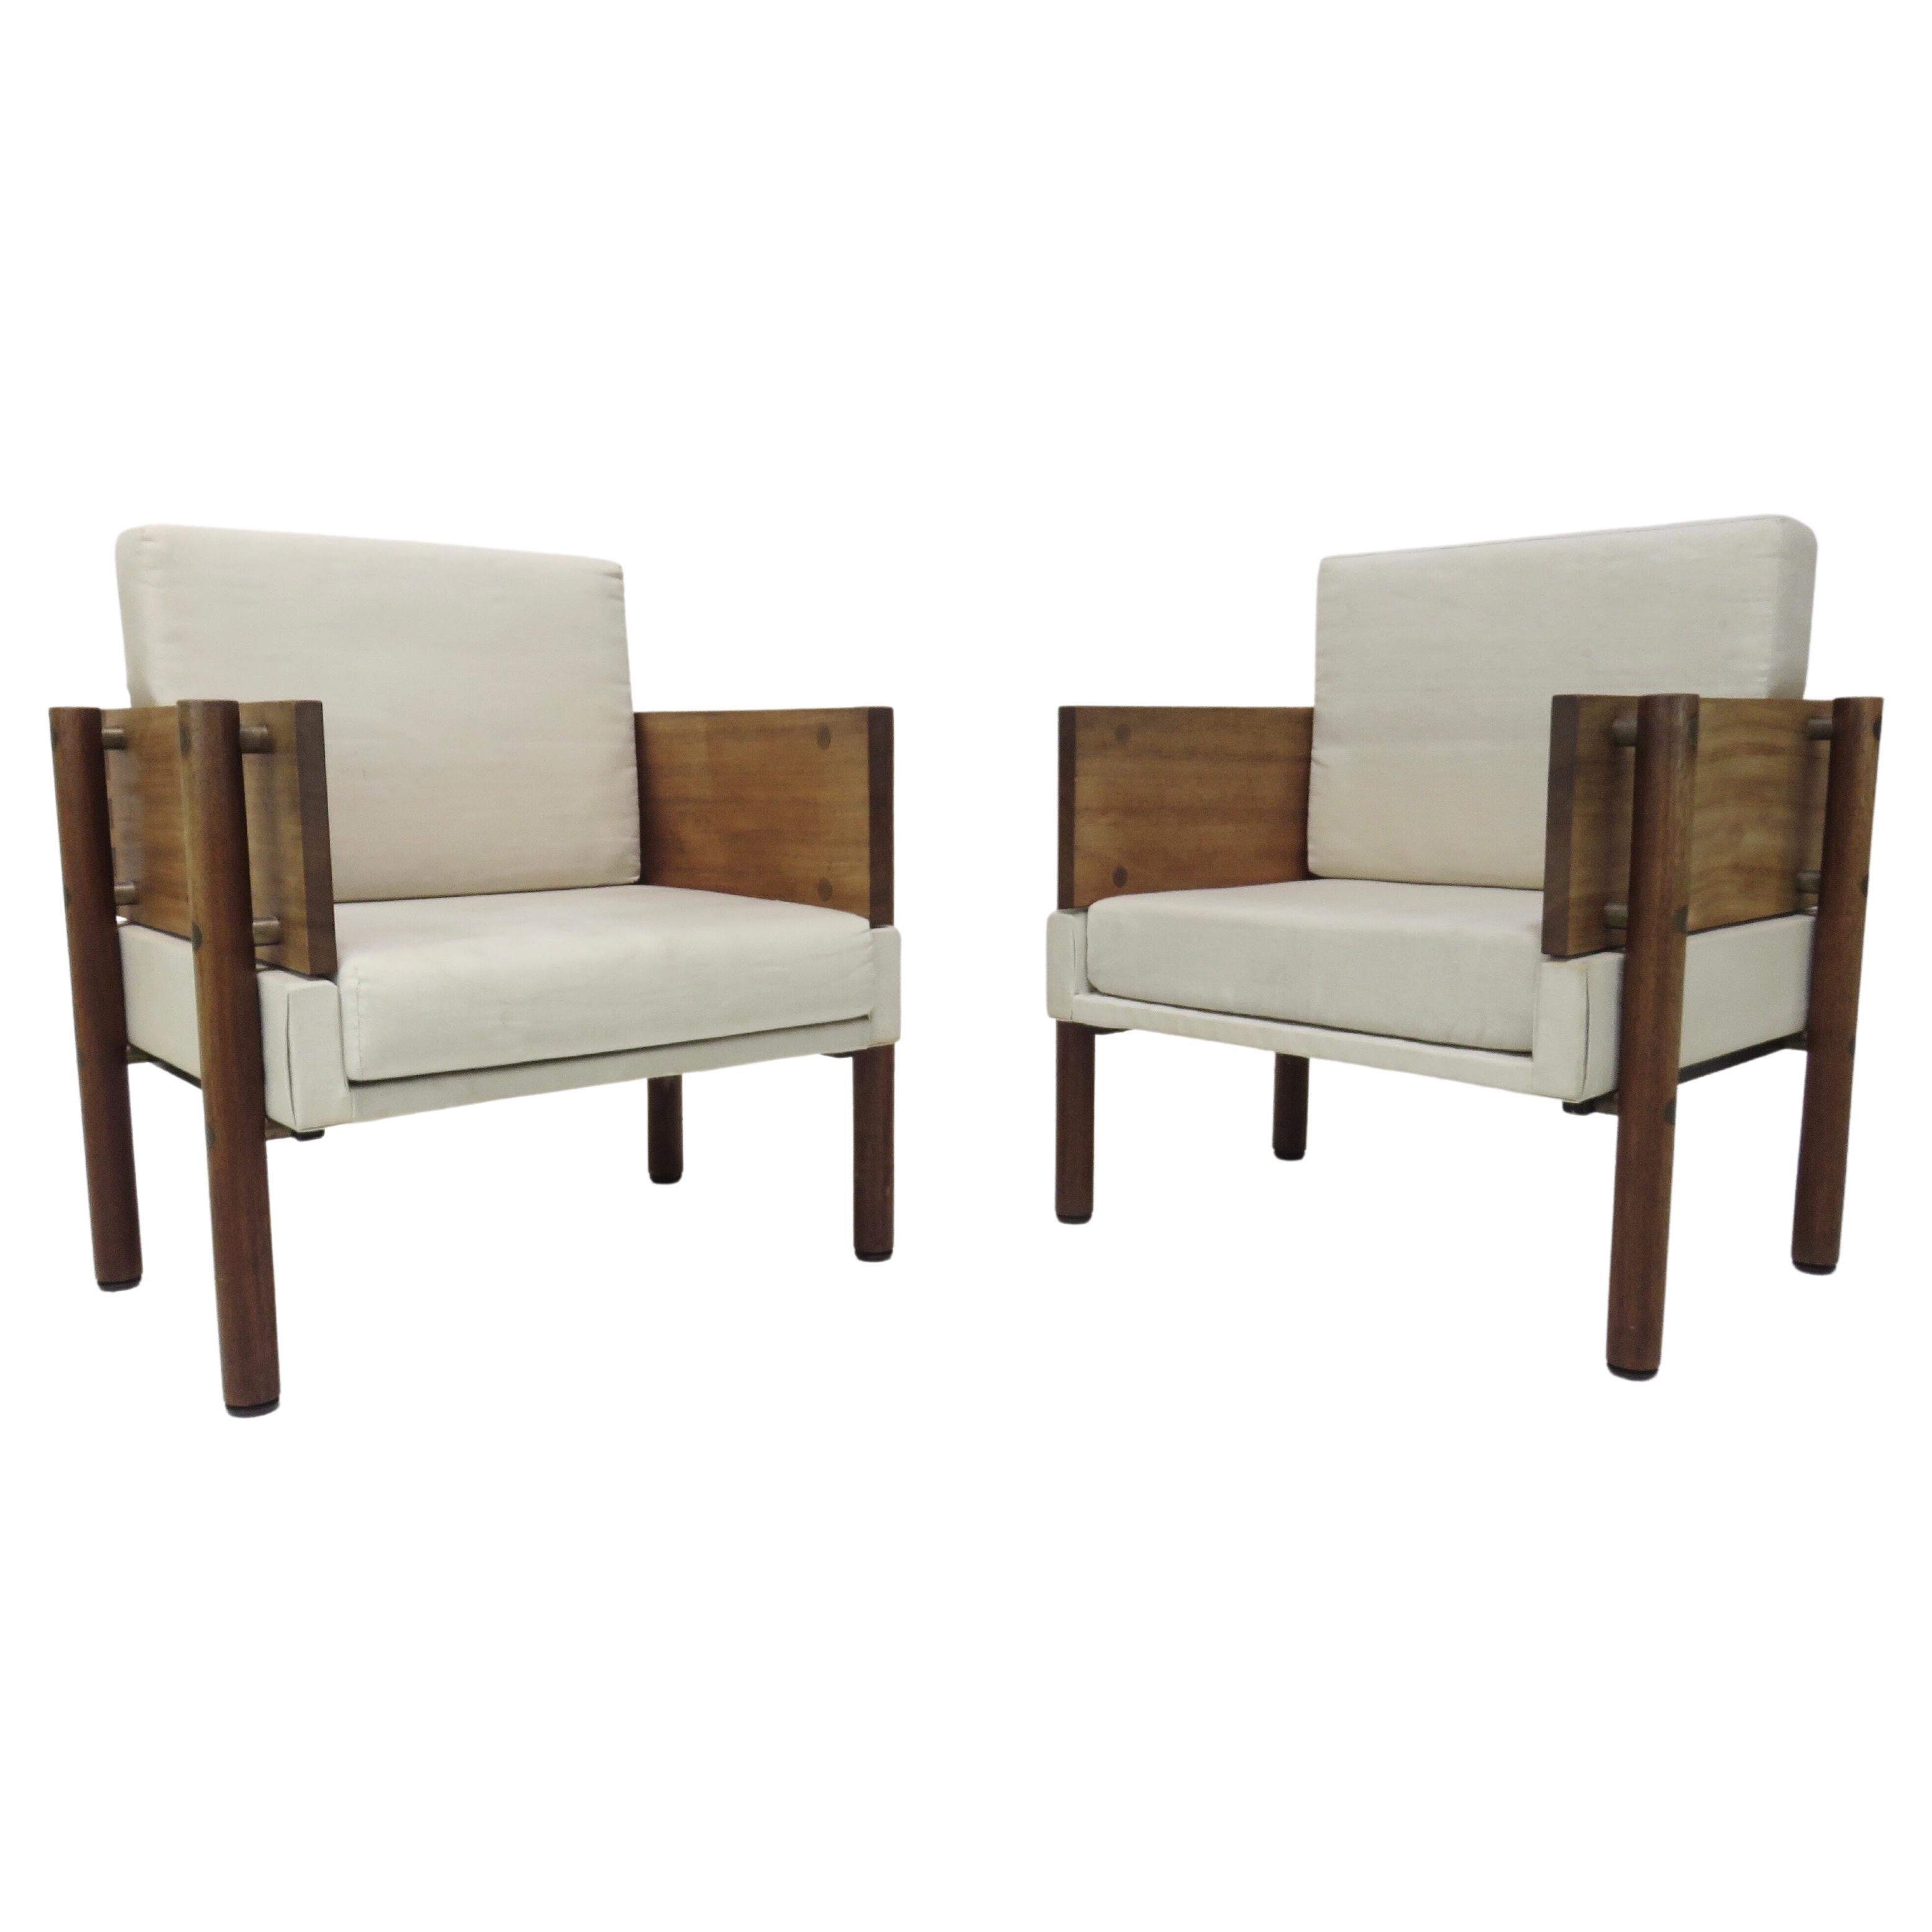 Architectural Pair of Chairs